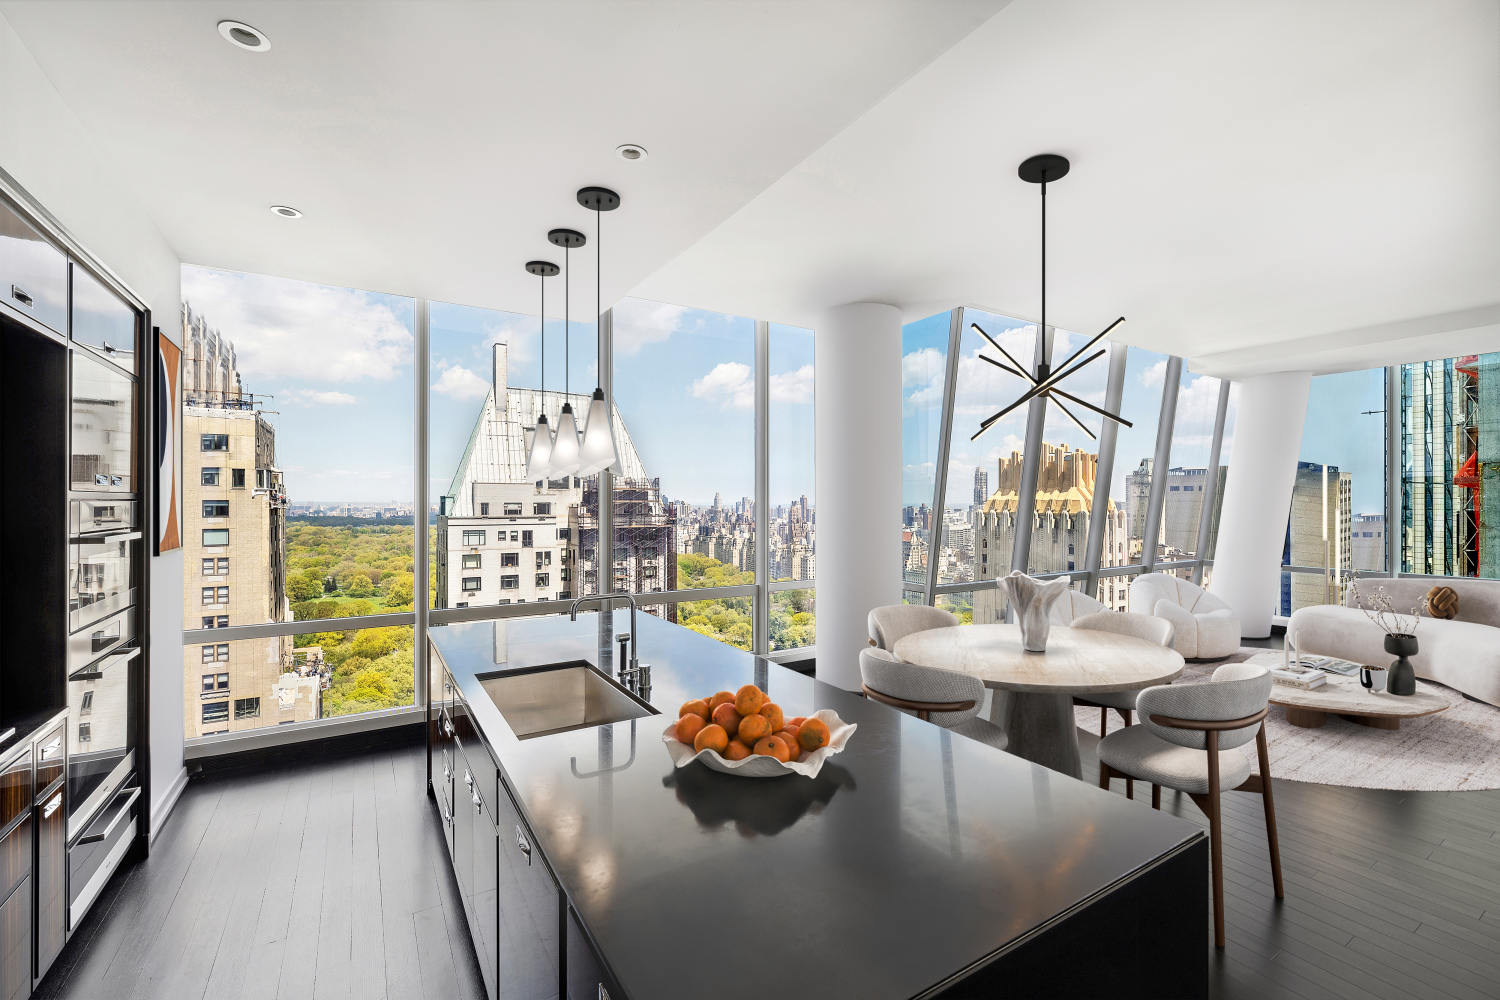 157 West 57th Street 40F, Central Park South, Midtown West, NYC - 2 Bedrooms  
2.5 Bathrooms  
5 Rooms - 